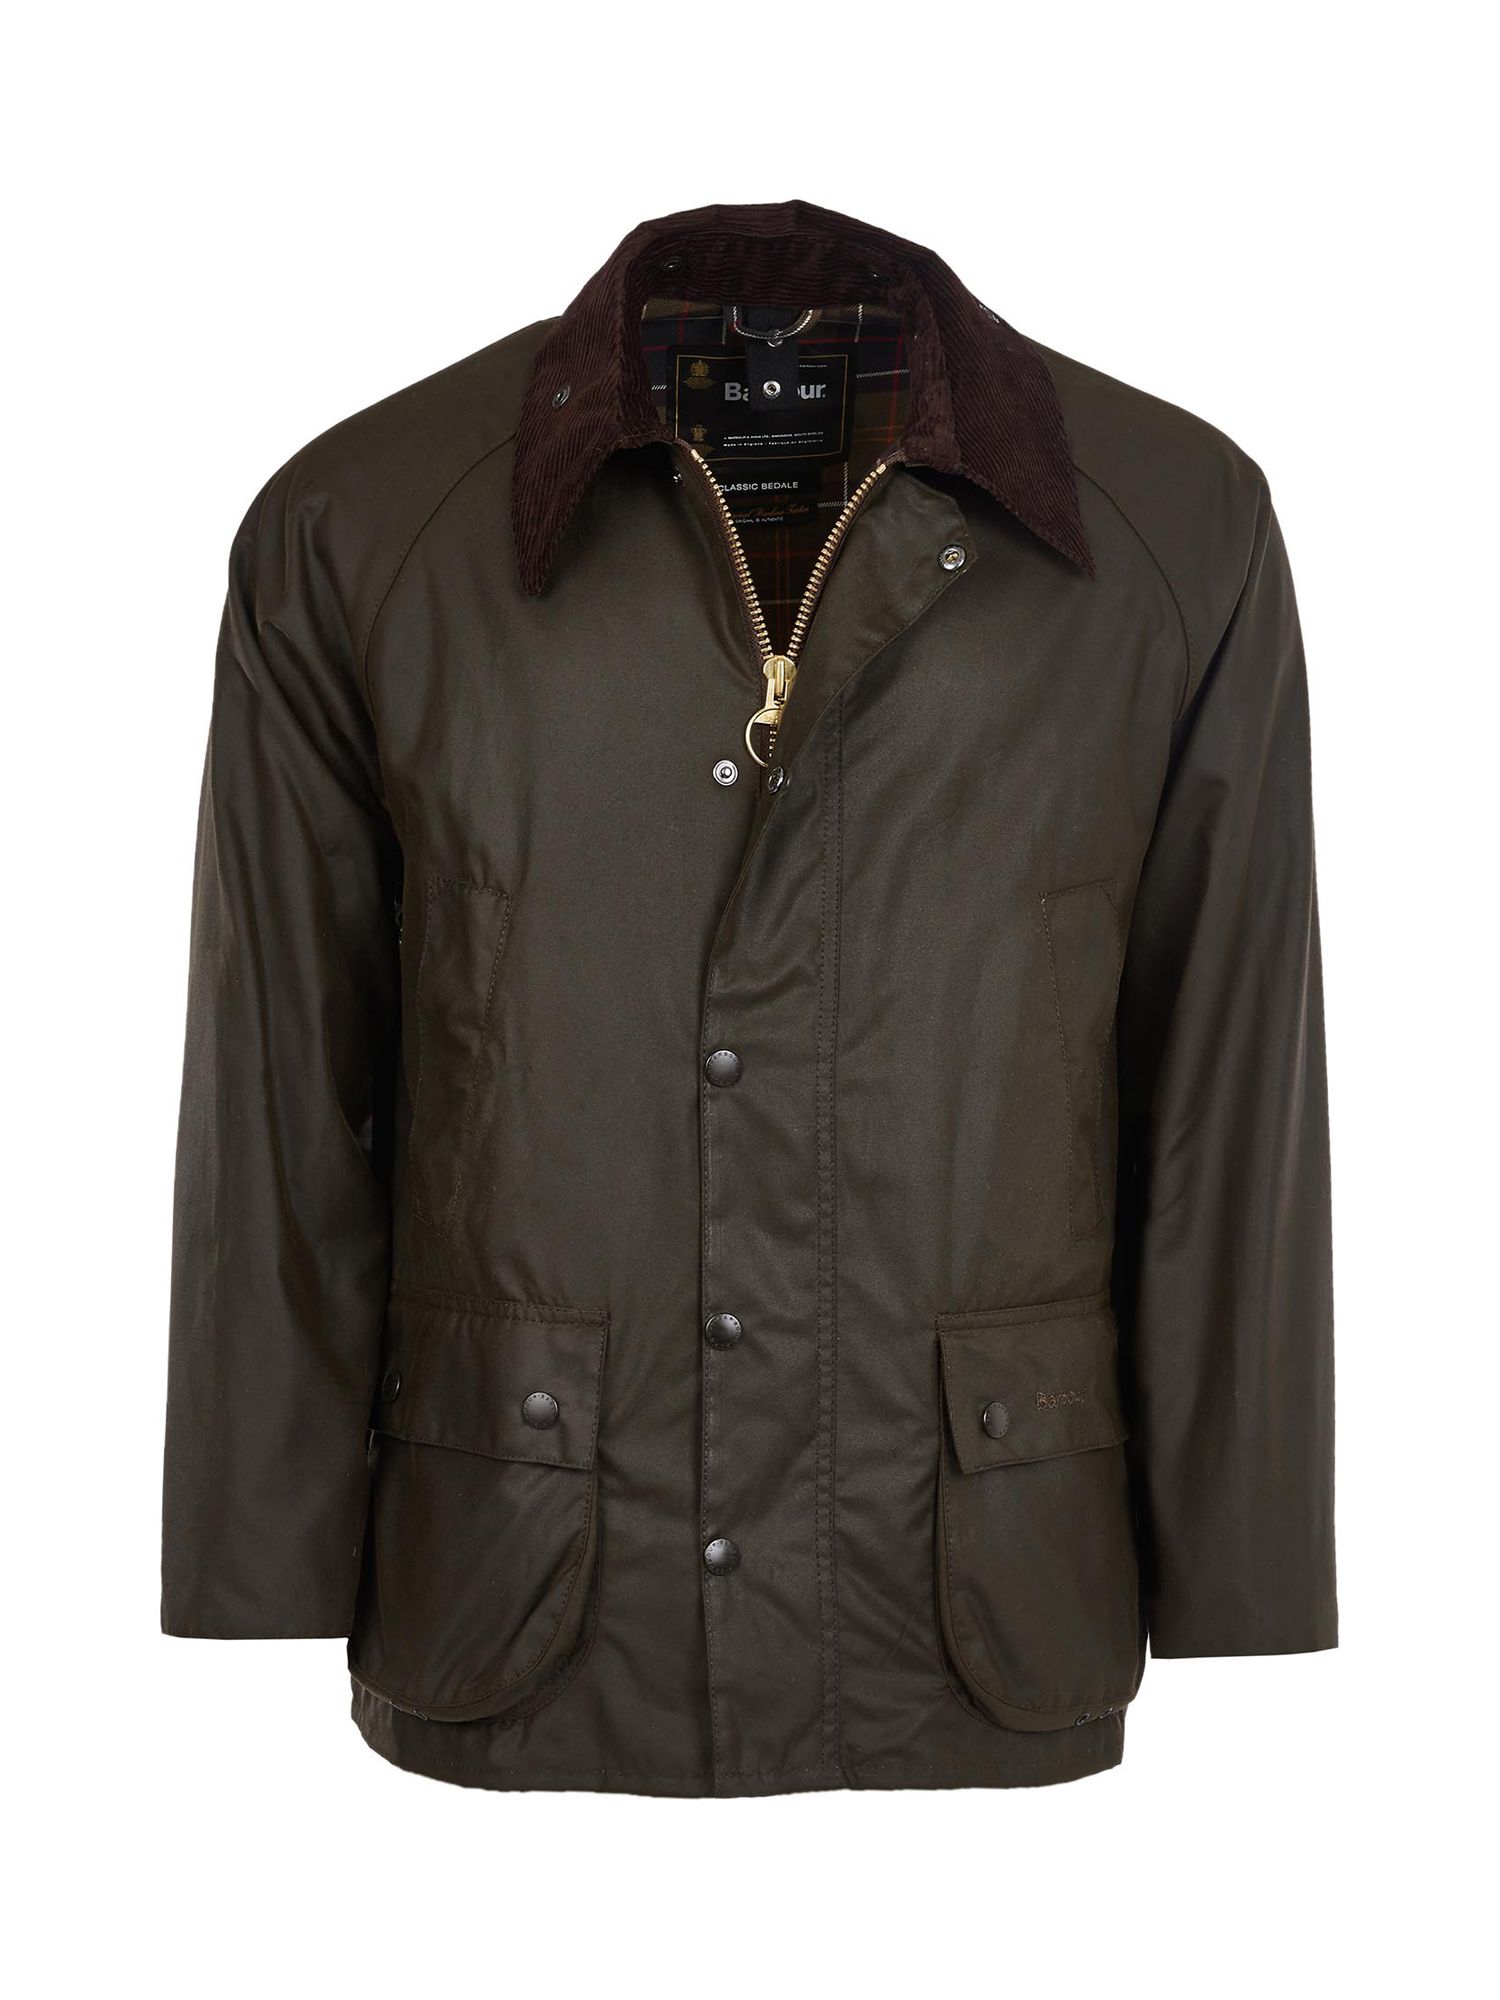 Barbour Classic Bedale Wax Jacket, Olive, 44R